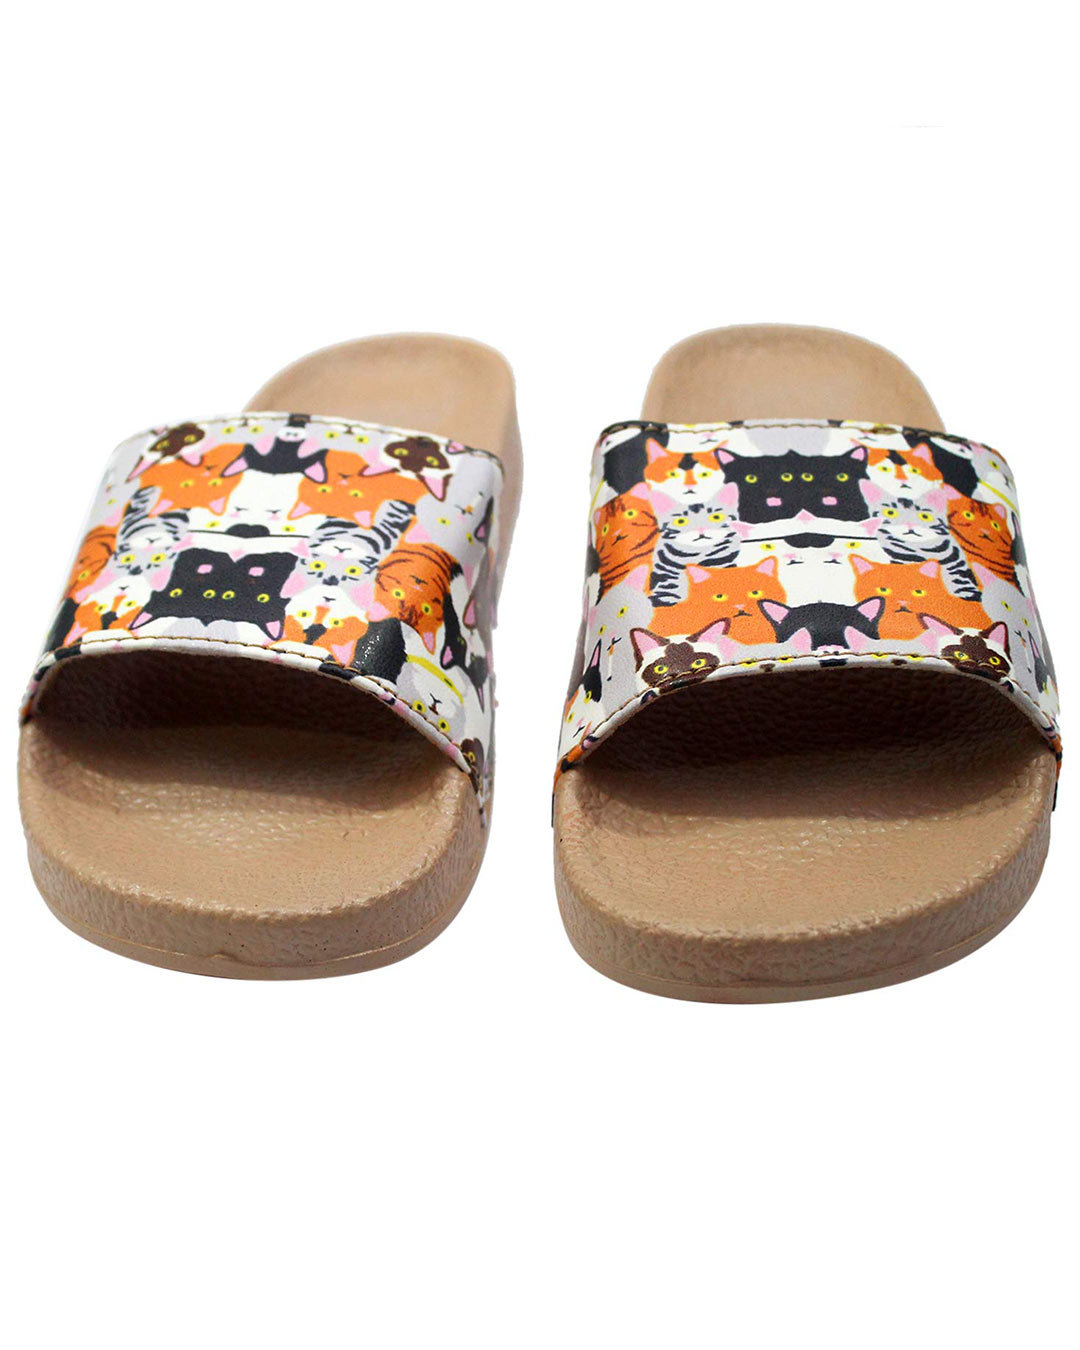 Shop FREECO Women's Dogs N Cats Print Slippers-Back